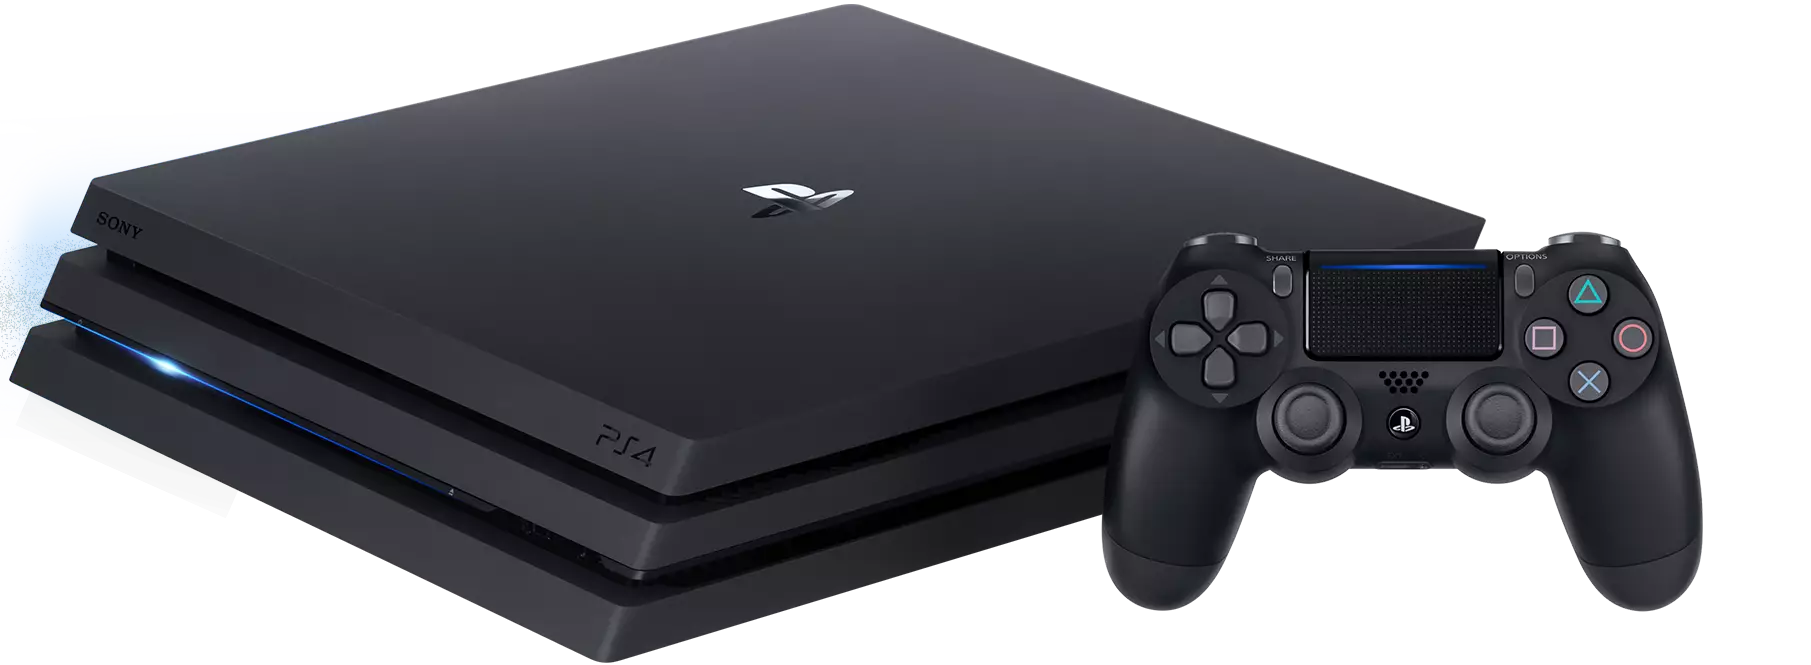 The Sony Playstation 5 Will Boast Sharper Graphics And Big Budget Exclusives.